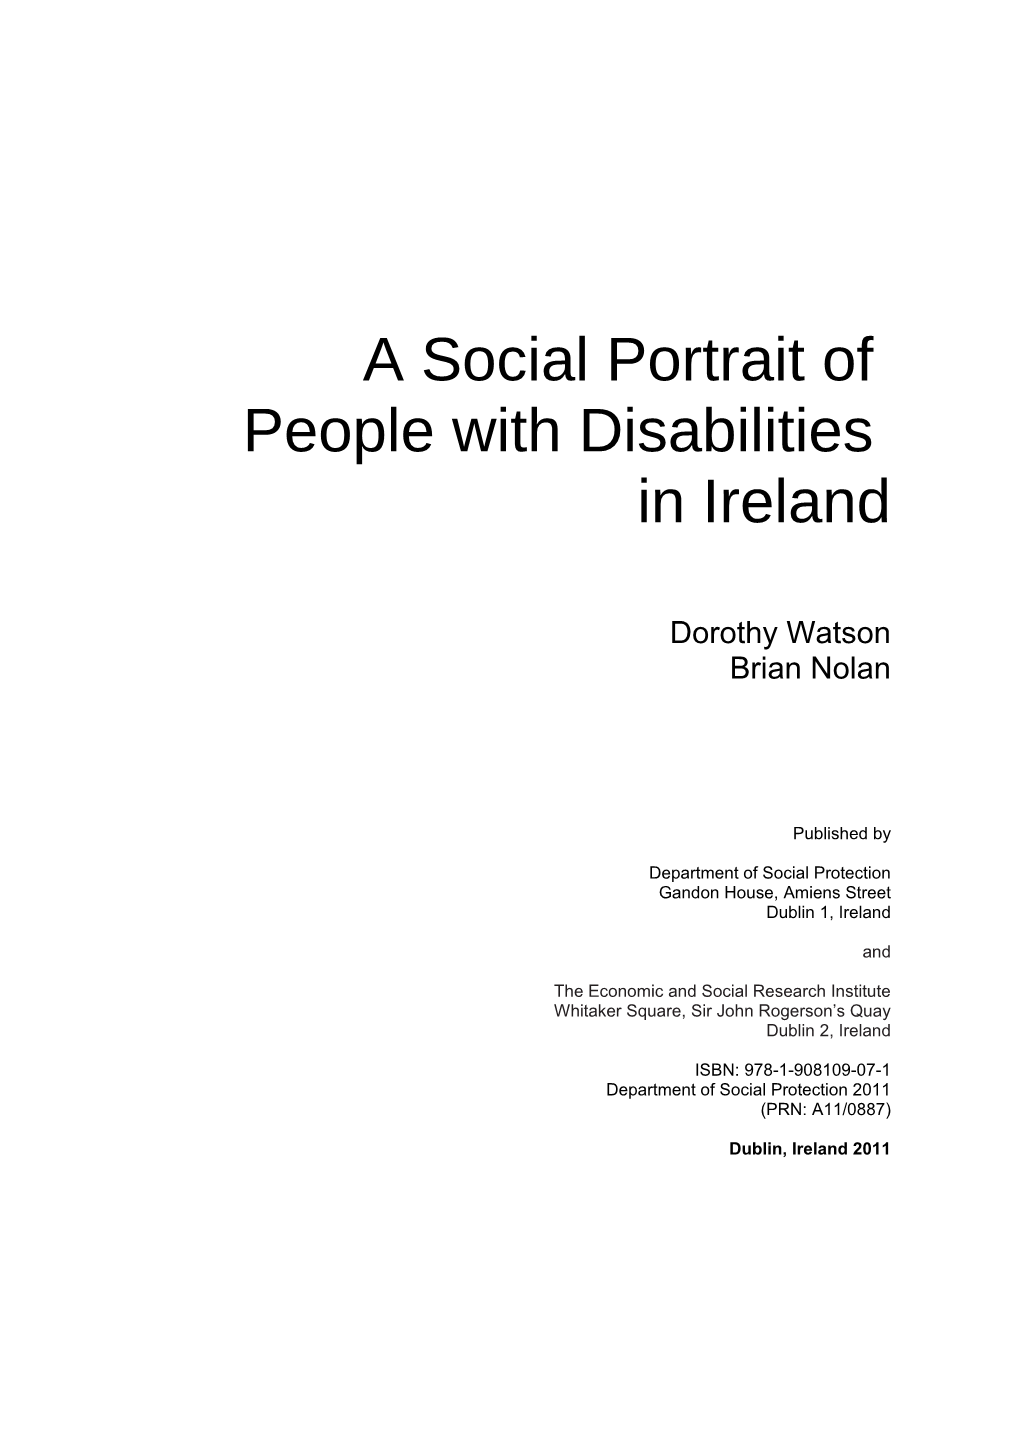 Social Portrait of People with Disabilities in Ireland